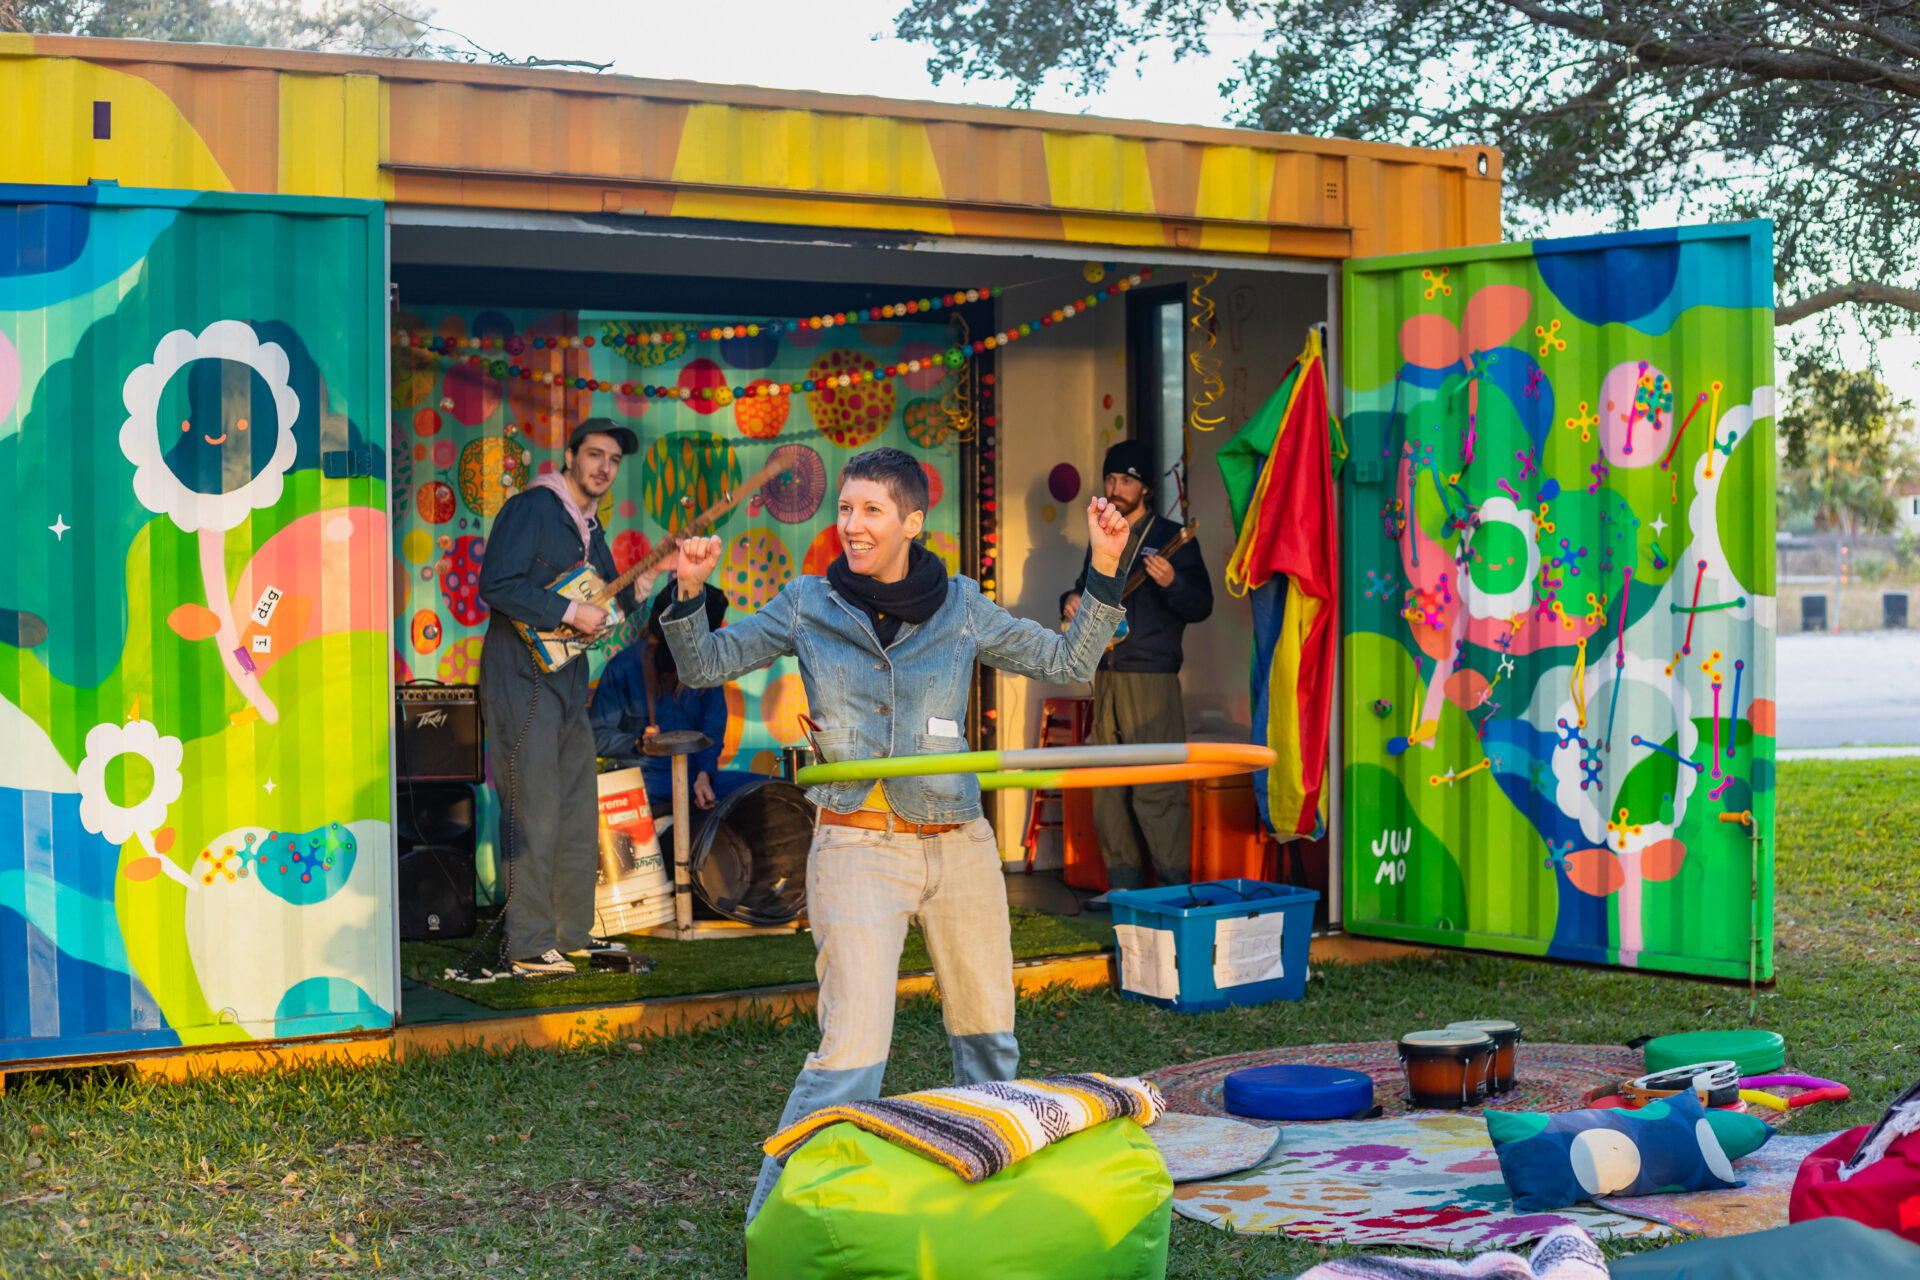 PT Creative District Manager Mitzi Gordon at the closing party for SPACEcraft in Florida. Gordon is hula hooping in front of an open shipping container, covered in vibrant murals. A band is playing inside the container.